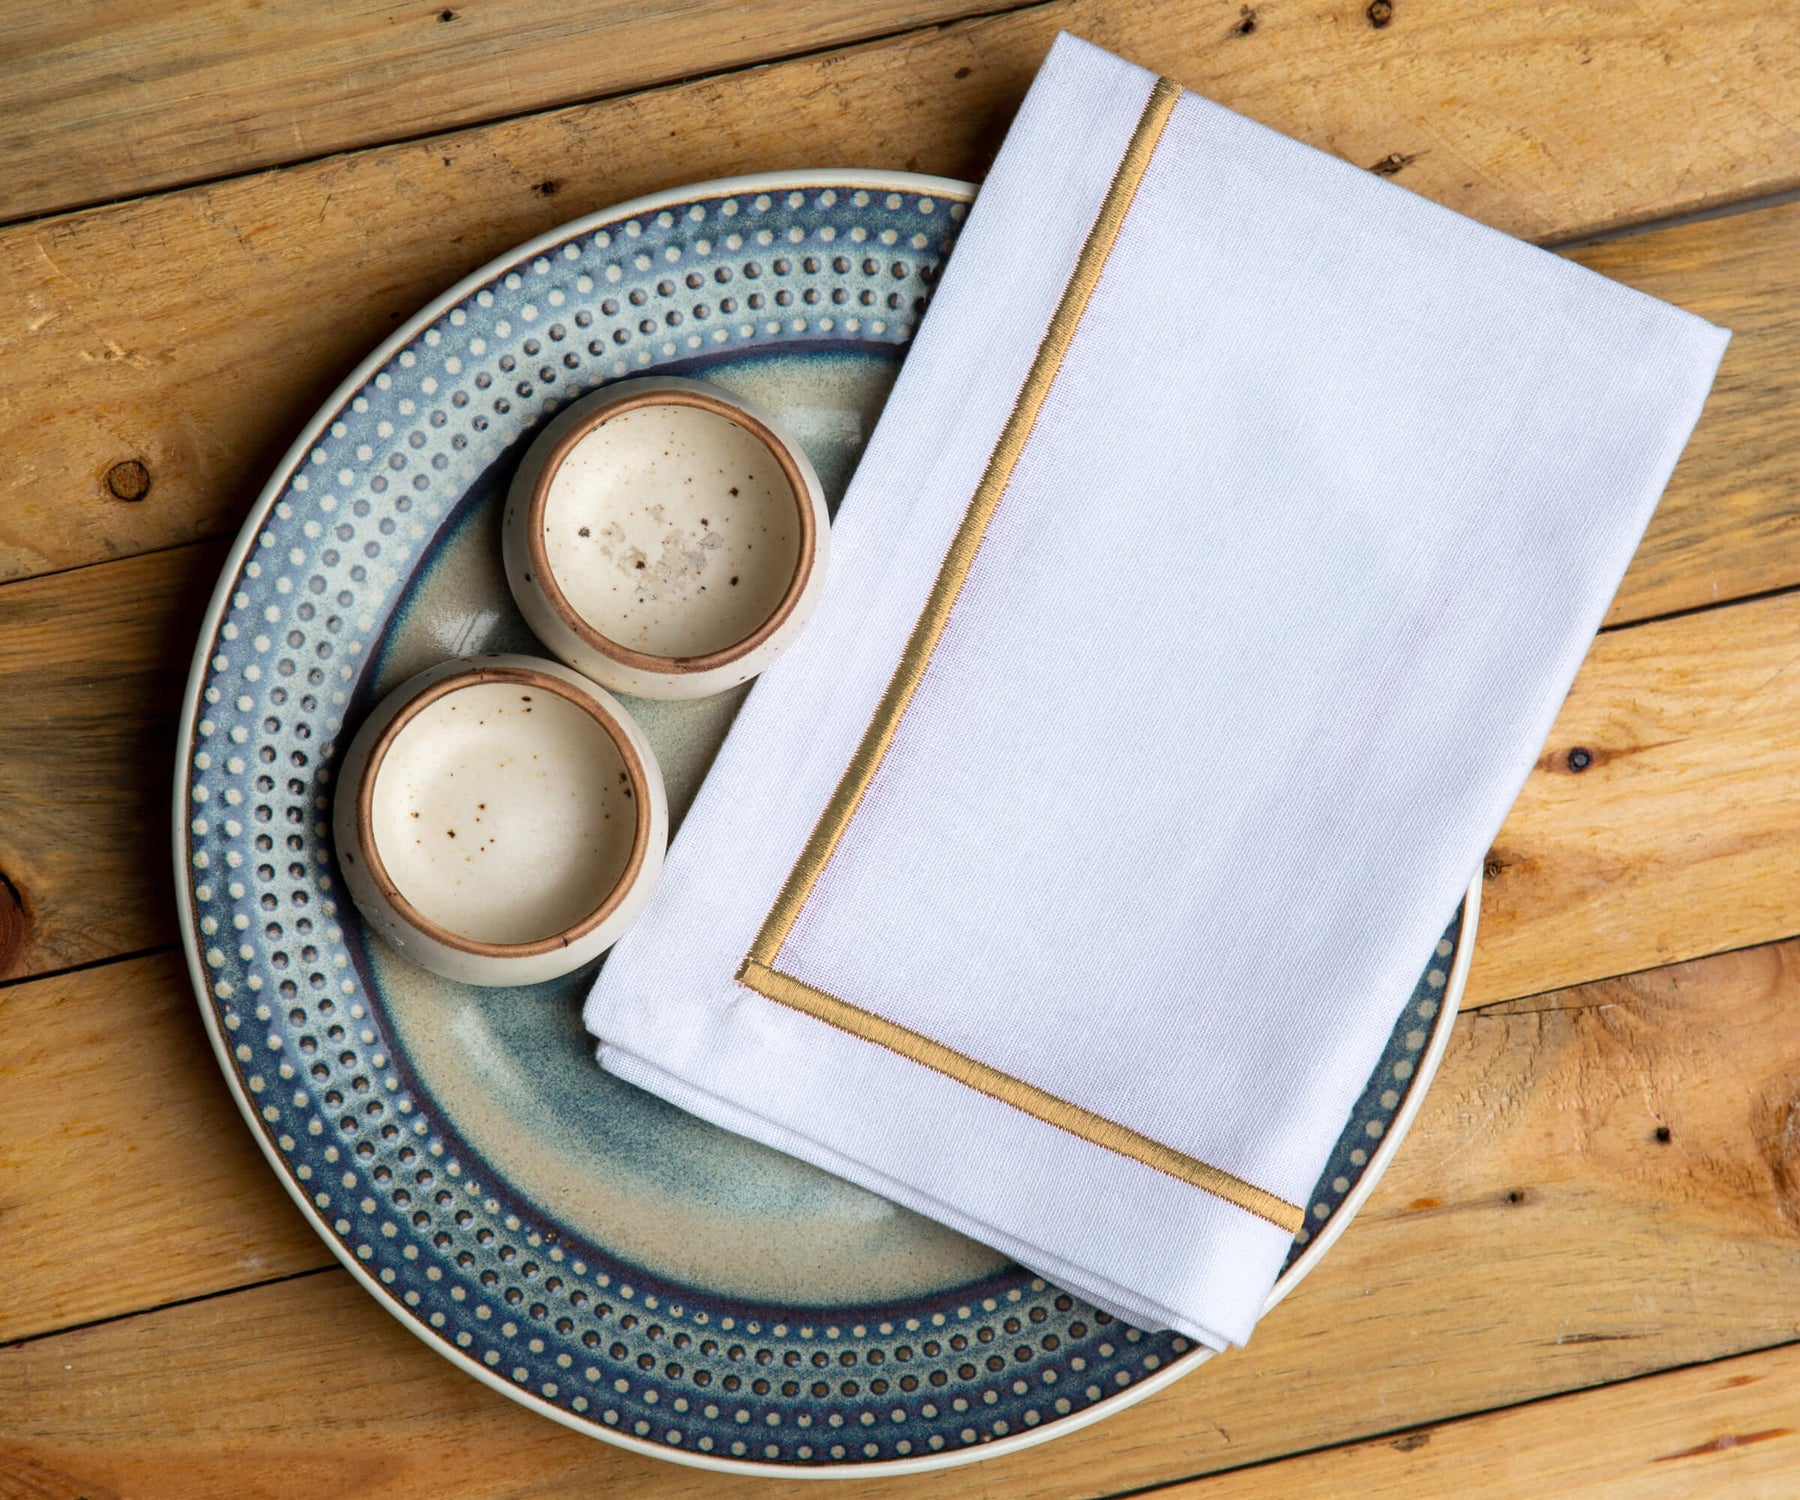 Linen cocktail napkins in various shades of beige, ideal for a cocktail party.